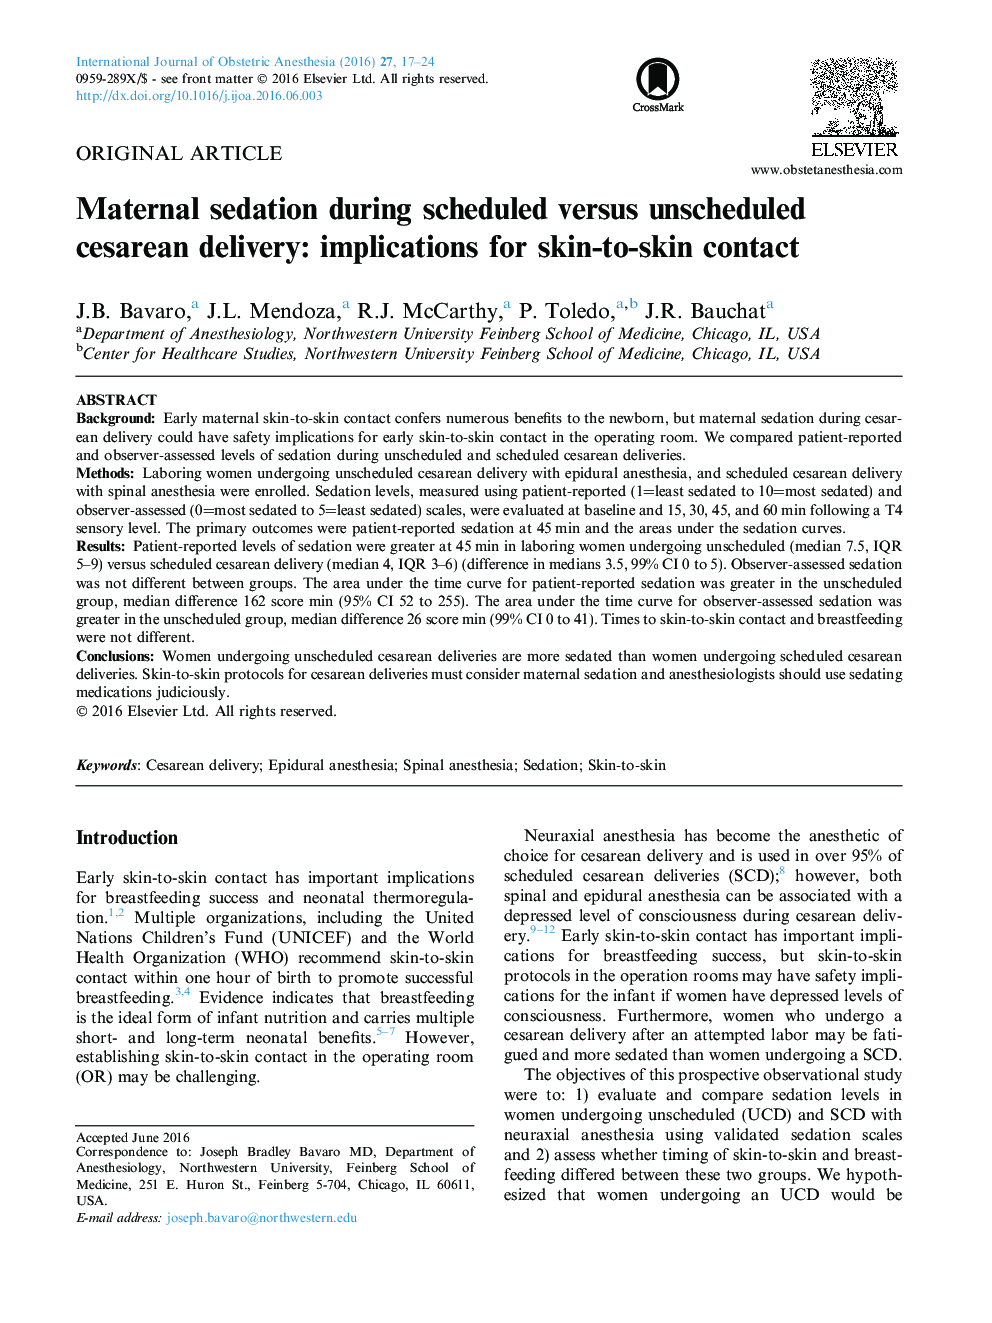 Maternal sedation during scheduled versus unscheduled cesarean delivery: implications for skin-to-skin contact